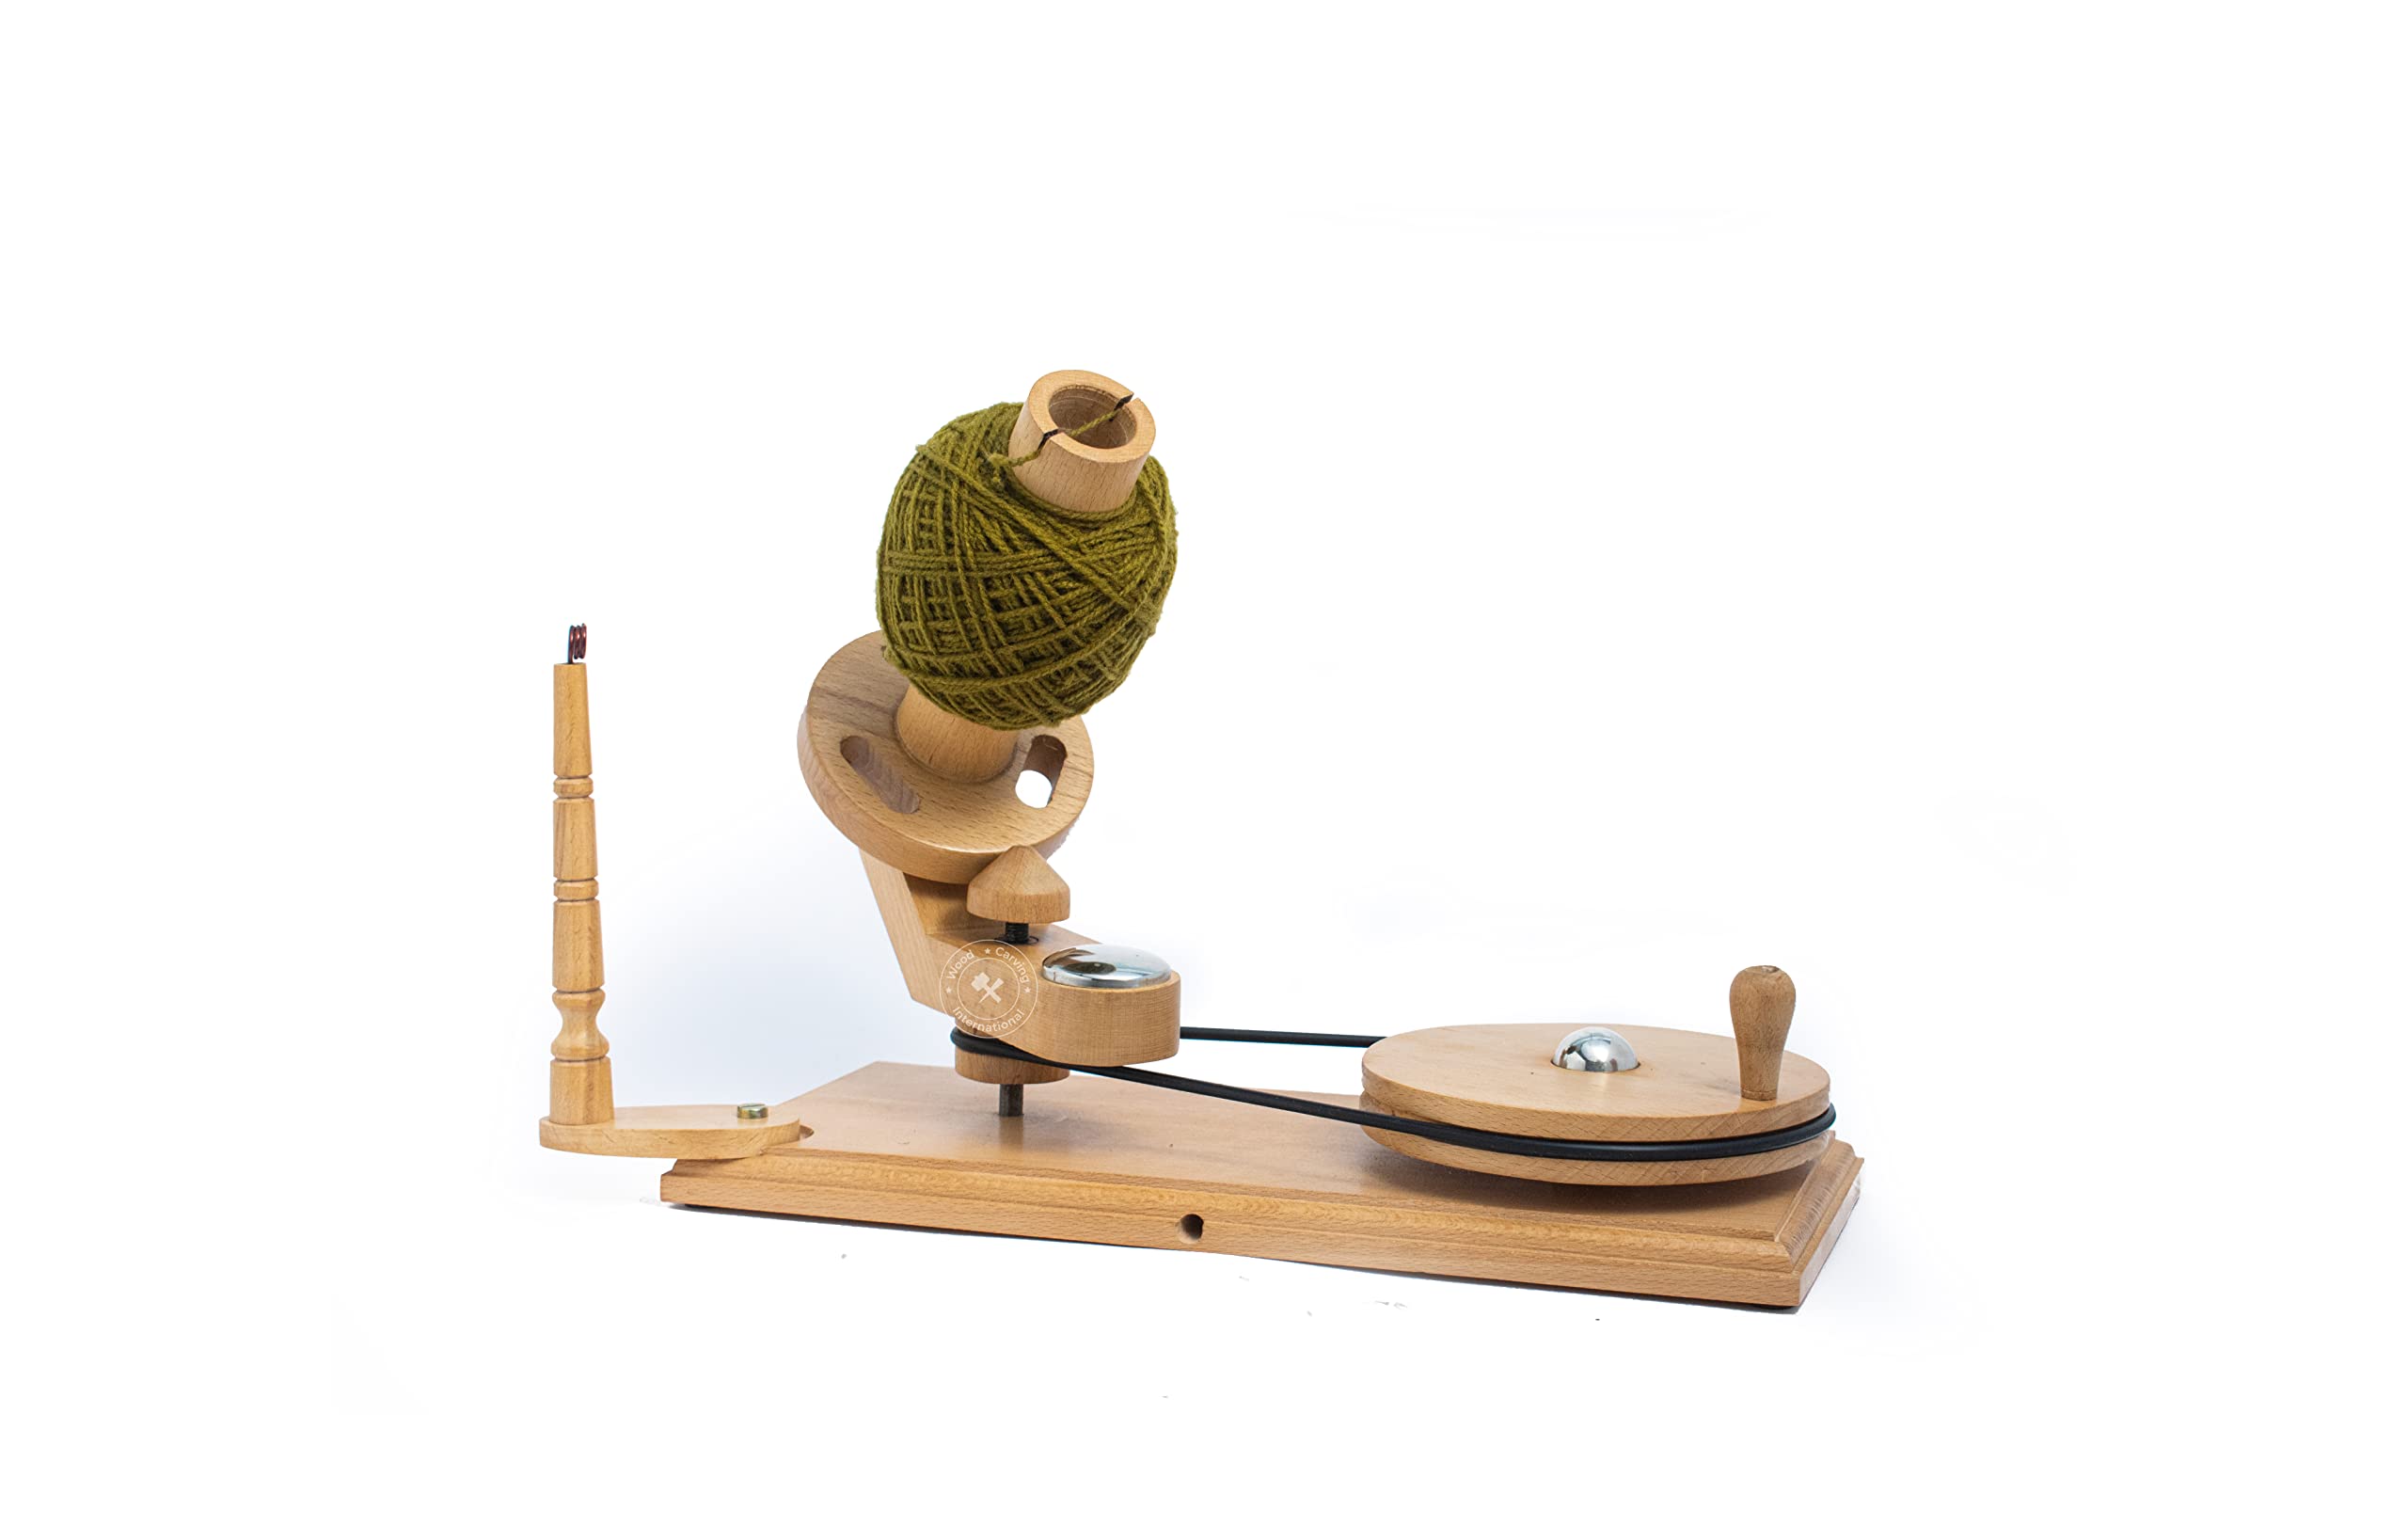 METLUMBER Hand-Operated Wooden Yarn Ball Winder for Large Capacity Winding,  Center Pull Ball Winder, Skein, Hank, Yarn Winder for Knitting and  Crocheting, Heavy Duty Ball Winder (Beech Wood)